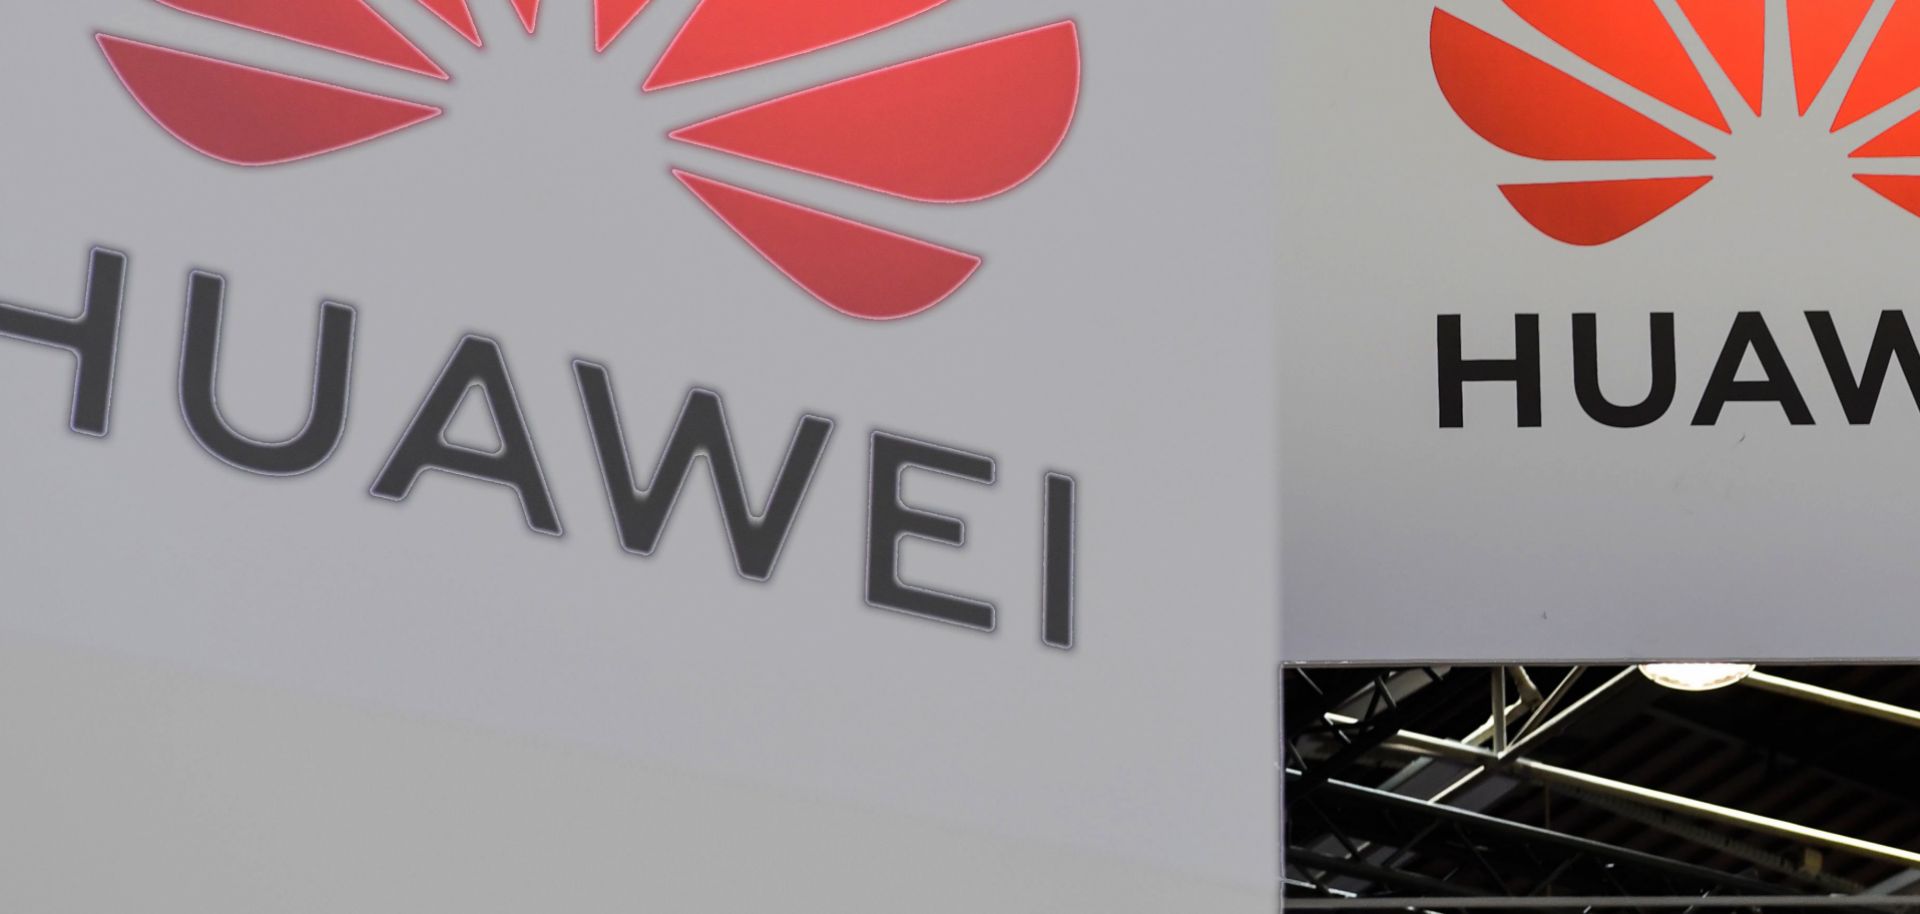 The Huawei logo is displayed at the annual VivaTech conference in Paris on May 16, 2019.